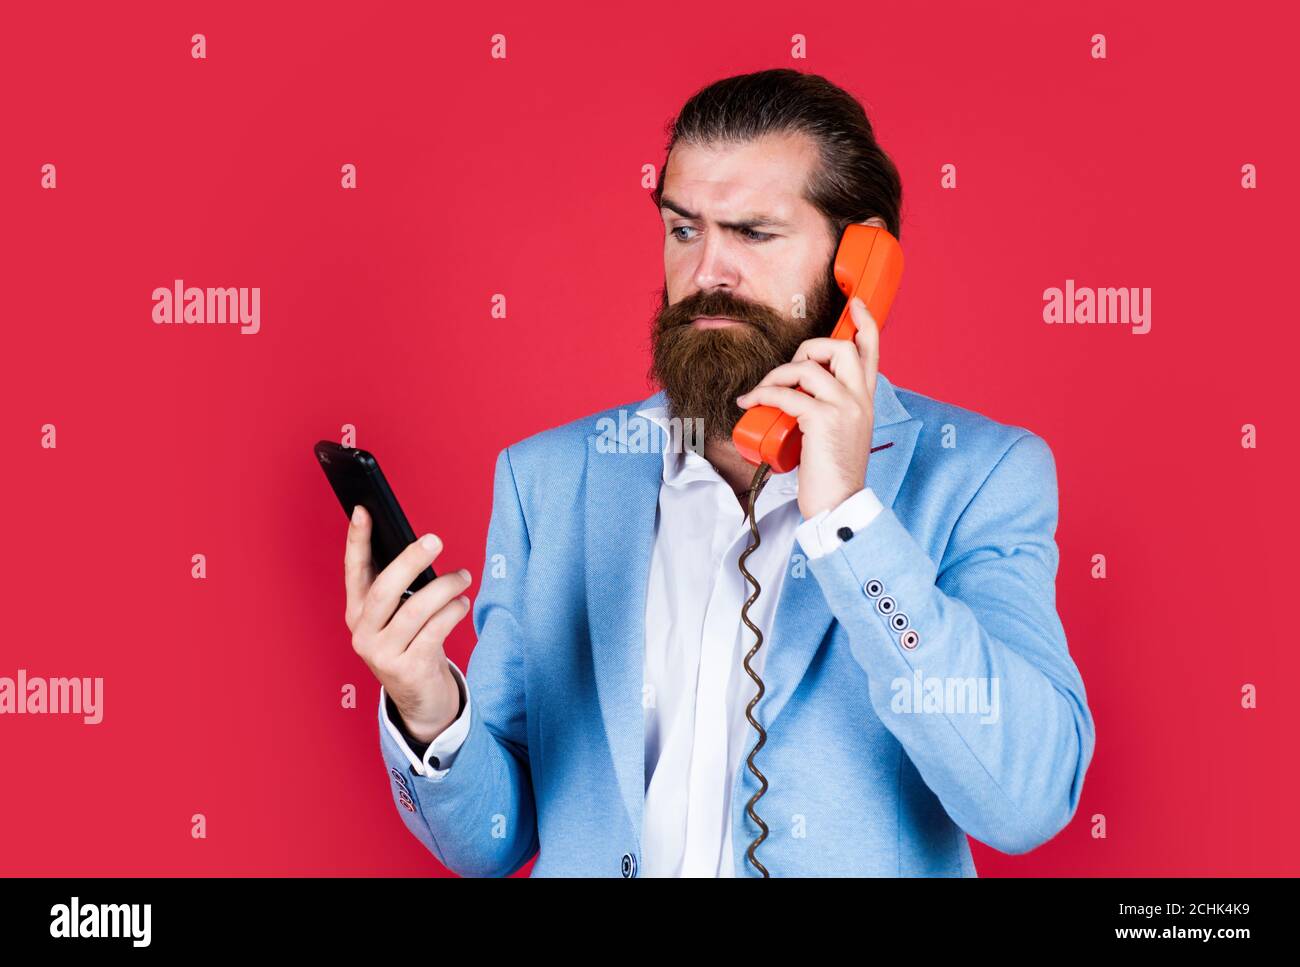 Expect the Best. Evolution of communication devices. Retro man talking on phone. Modern mobile phone and old vintage classic telephone. Technology is advancing all the time. live in Digital Age. Stock Photo